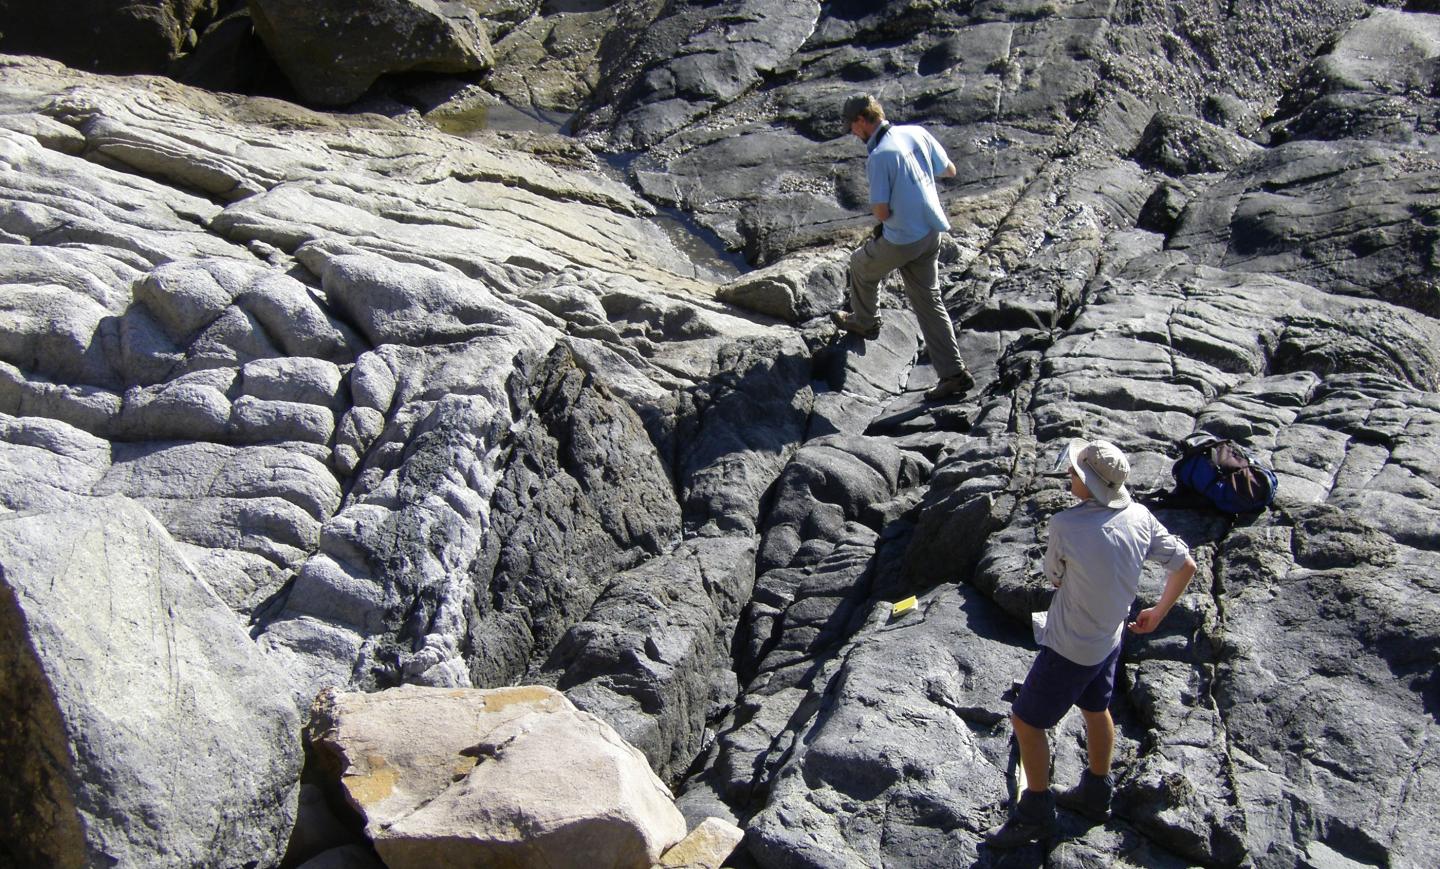 The QUT Research Team Examining and Sampling Igneous Rocks in North Queensland (2 of 2)